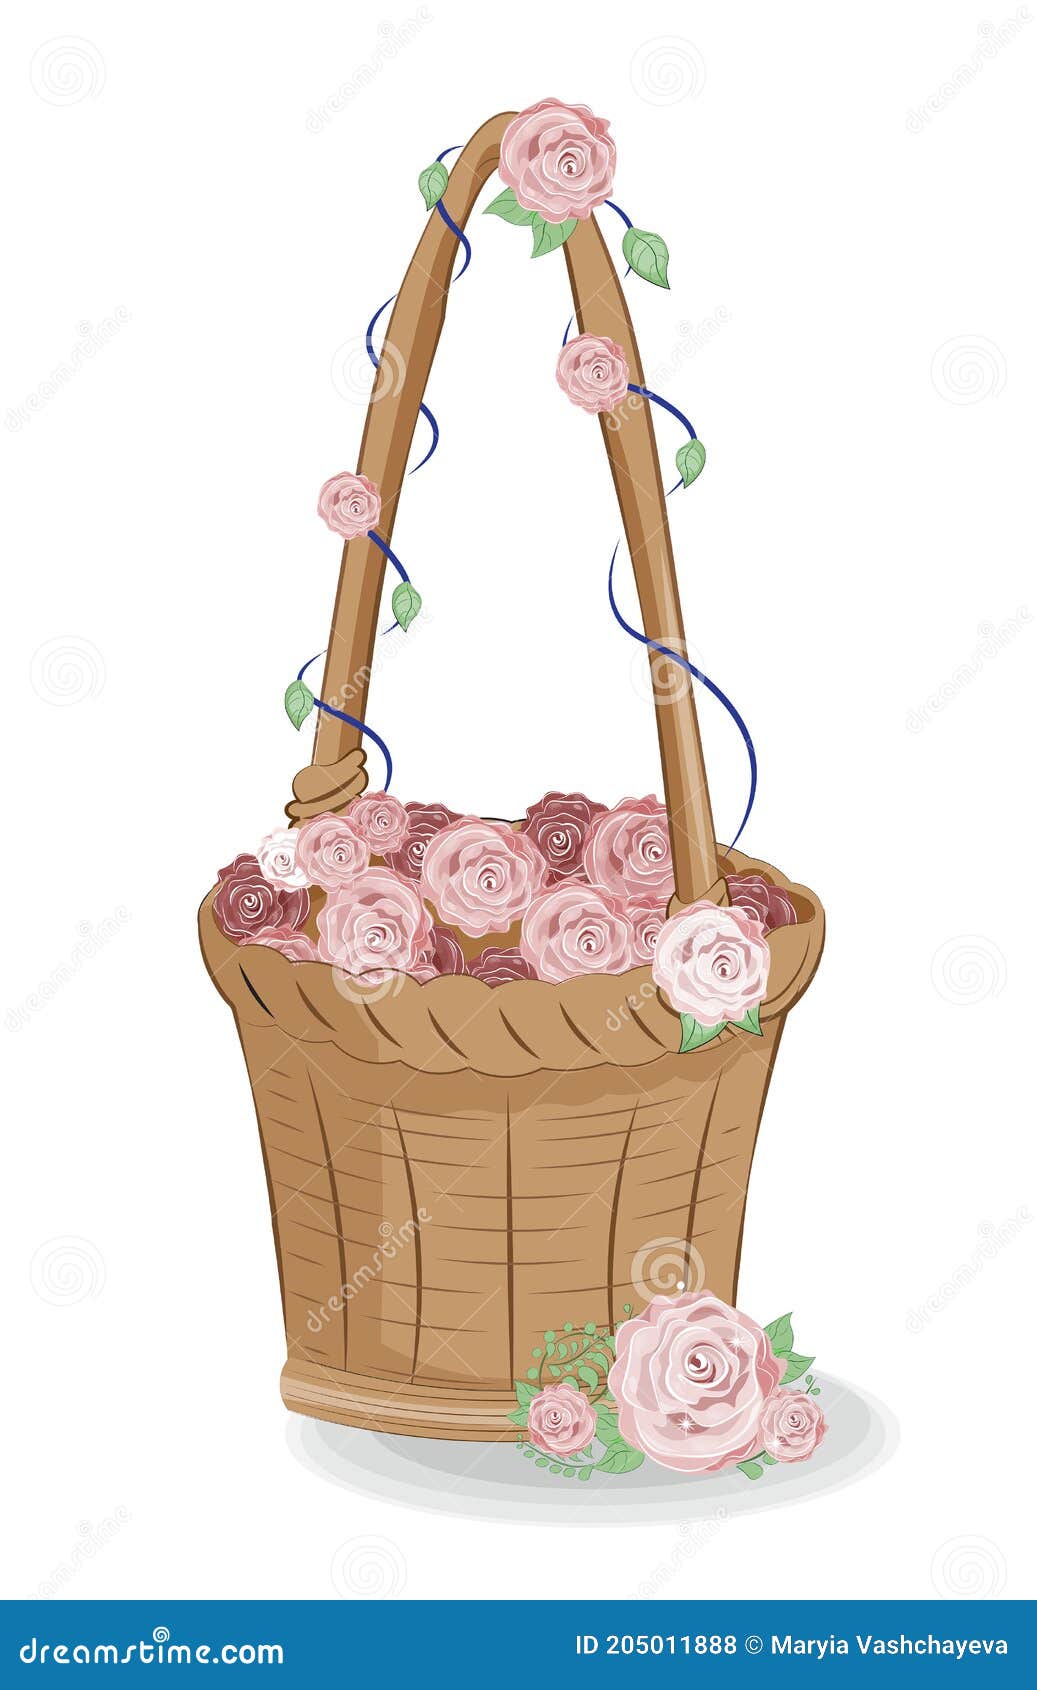 Flower Basket Clipart PNG Images, Flowers Design In Basket, Beautiful  Flowers, Flower Desain In Basket, Flowers Decoration PNG Image For Free  Download